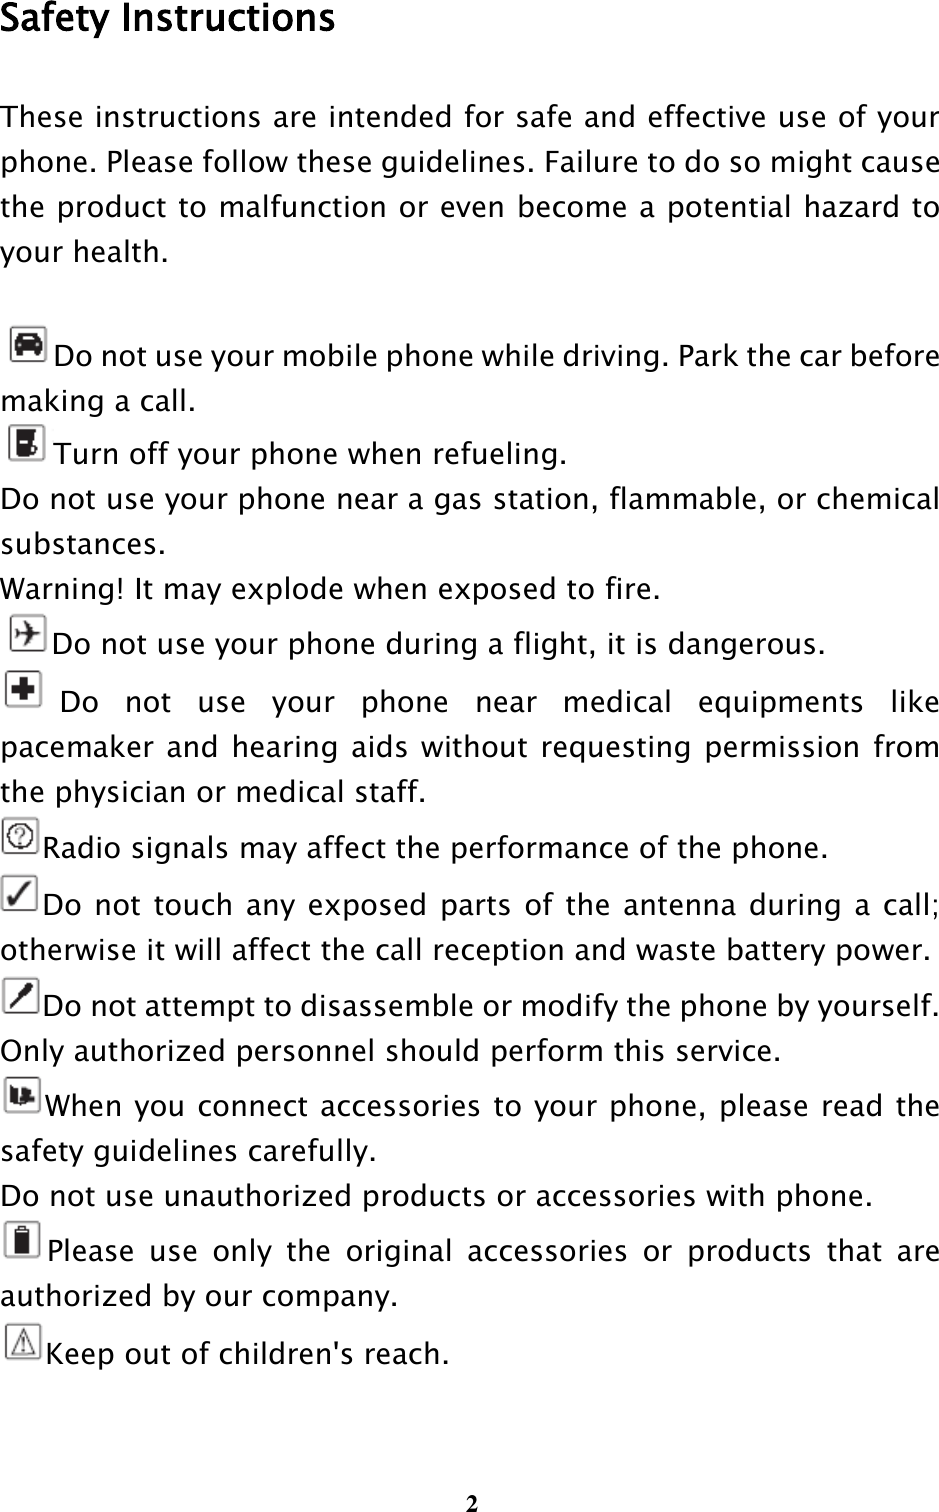  2 Safety Instructions These instructions are intended for safe and effective use of your phone. Please follow these guidelines. Failure to do so might cause the product to malfunction or even become a potential hazard to your health.  Do not use your mobile phone while driving. Park the car before    making a call. Turn off your phone when refueling. Do not use your phone near a gas station, flammable, or chemical substances.   Warning! It may explode when exposed to fire. Do not use your phone during a flight, it is dangerous. Do  not  use  your  phone  near  medical  equipments  like pacemaker and hearing aids without requesting permission from the physician or medical staff. Radio signals may affect the performance of the phone. Do not  touch any exposed parts of the antenna during a call; otherwise it will affect the call reception and waste battery power. Do not attempt to disassemble or modify the phone by yourself. Only authorized personnel should perform this service. When you connect accessories to your phone, please read the safety guidelines carefully. Do not use unauthorized products or accessories with phone. Please  use  only  the  original  accessories  or  products  that  are authorized by our company. Keep out of children&apos;s reach.  